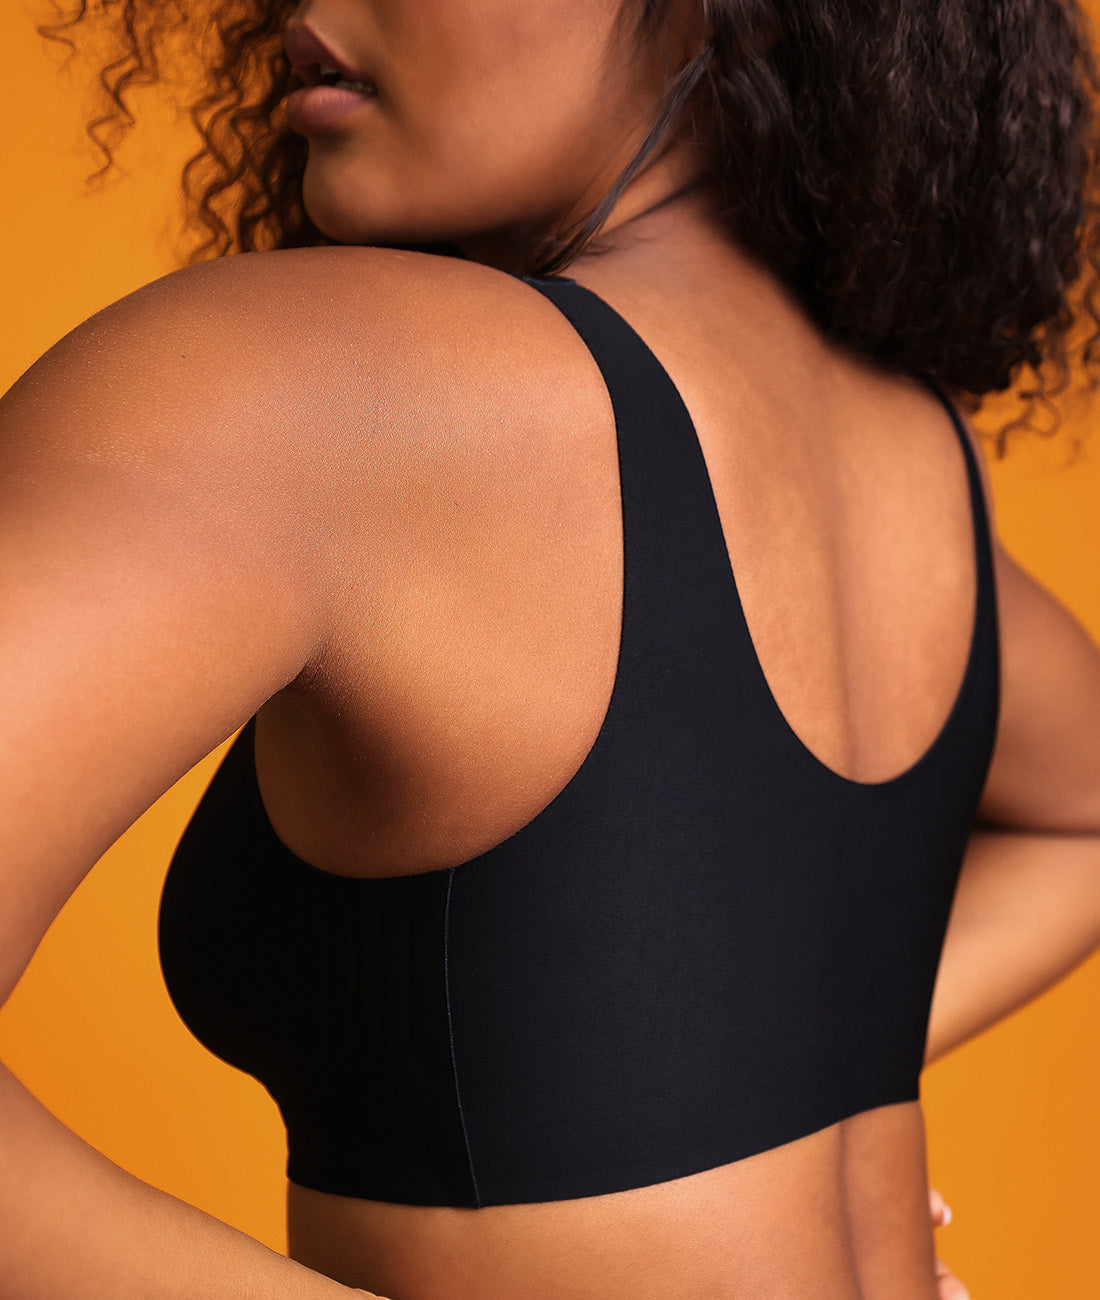 Discover Ultimate Comfort with Knix's Newest Everyday Bra: The One